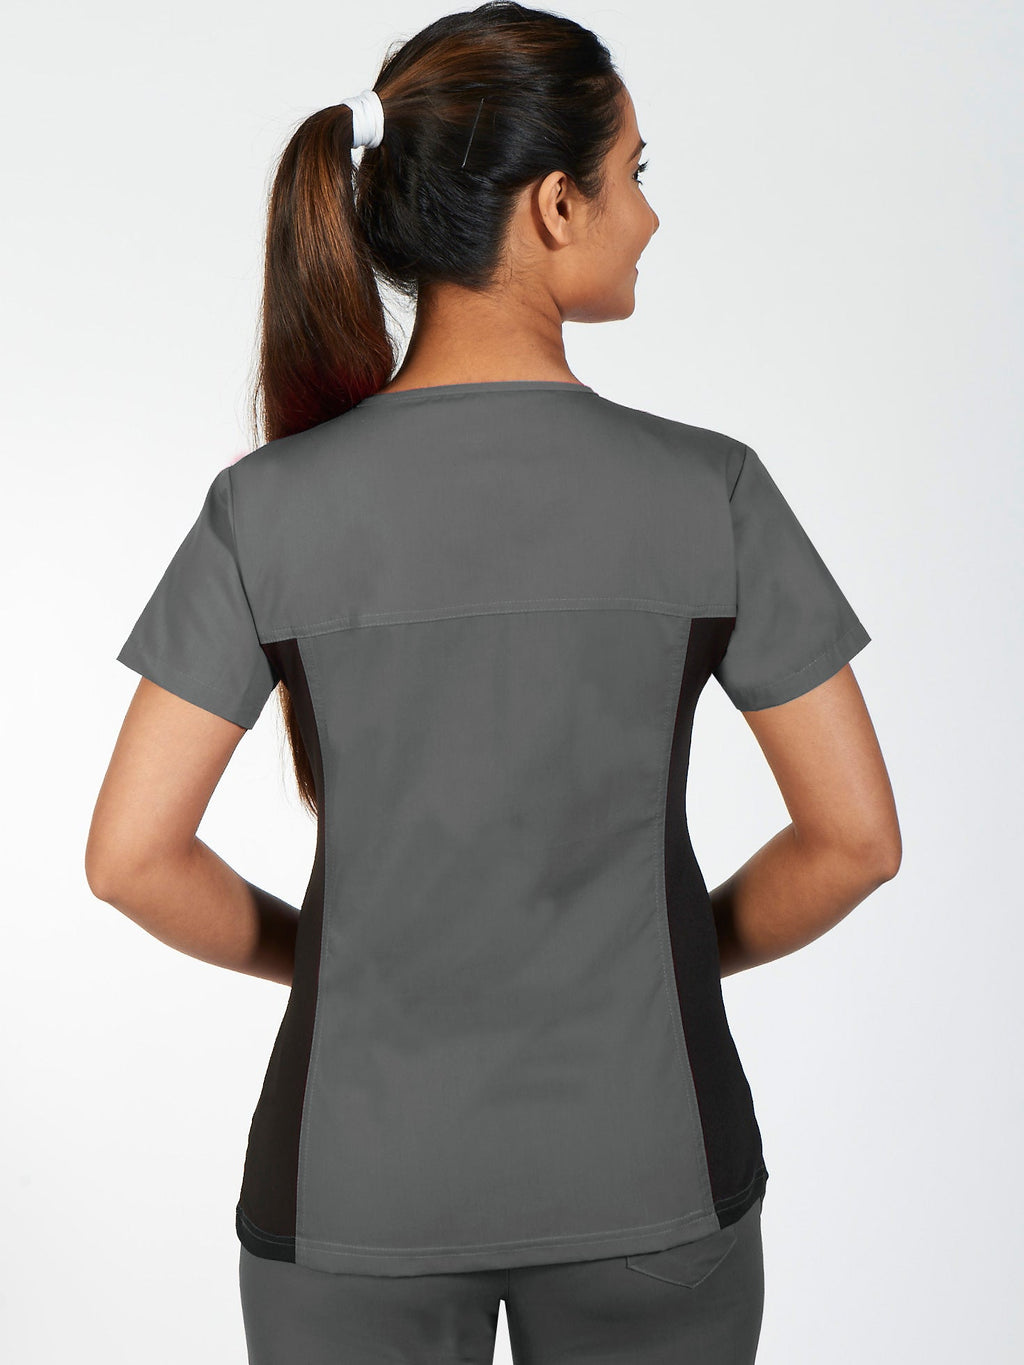 Product - Clearance Flex V-Neck Women Scrub Top by MOBB